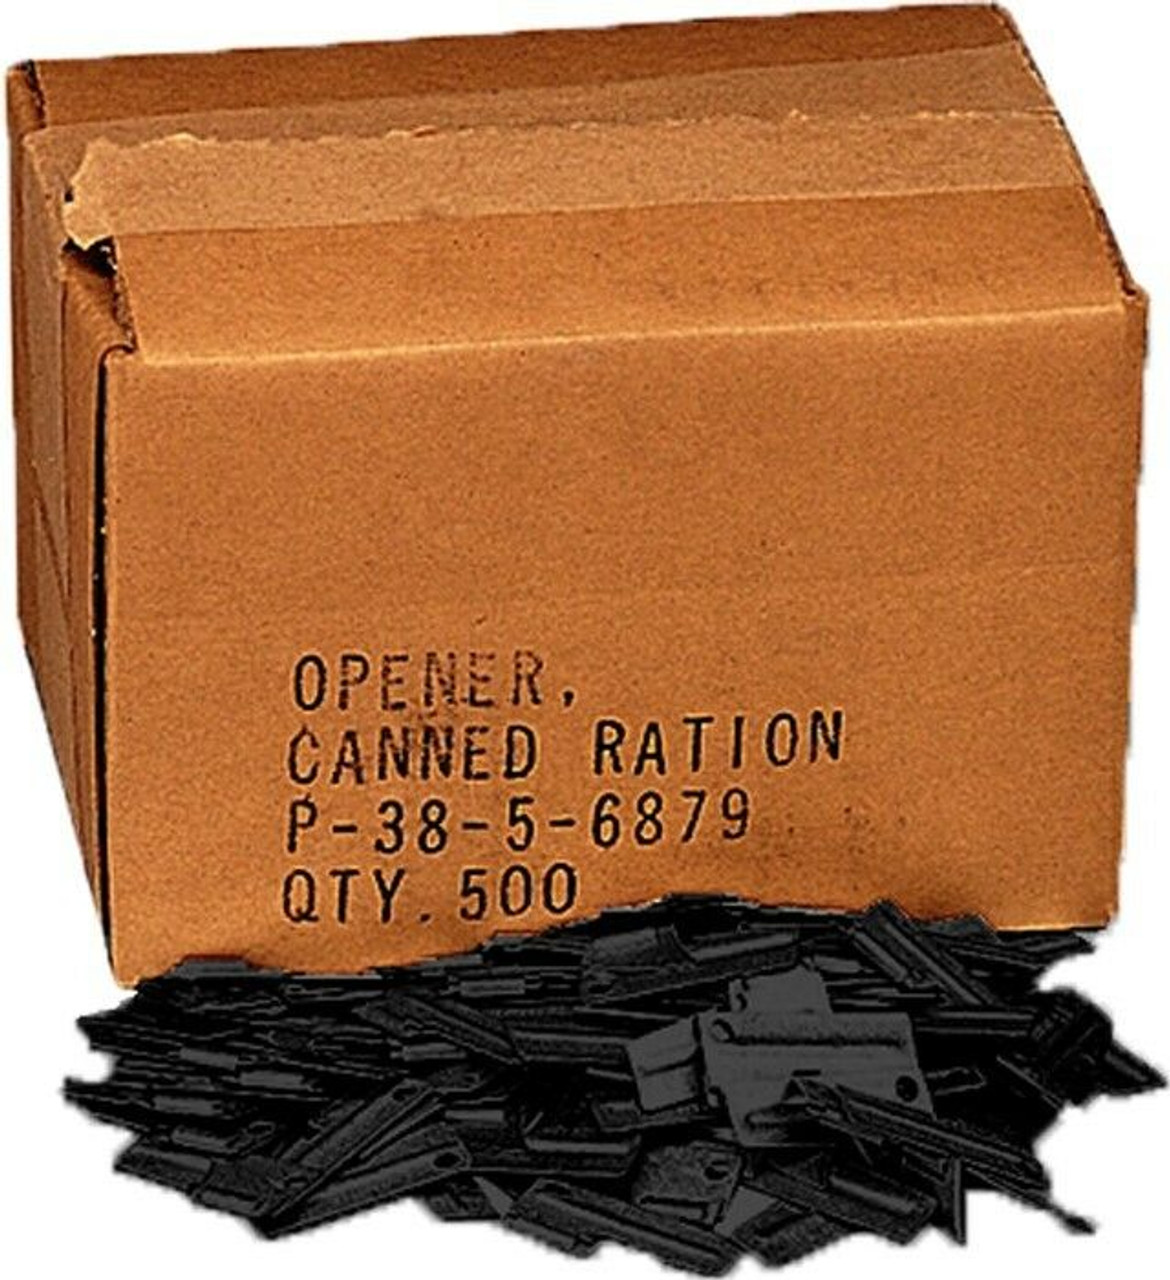 P38 & P51 Can Opener 10 Pack - 5 of Each US Shelby CO U.S Made NEW Sur –  Ranger Bands®